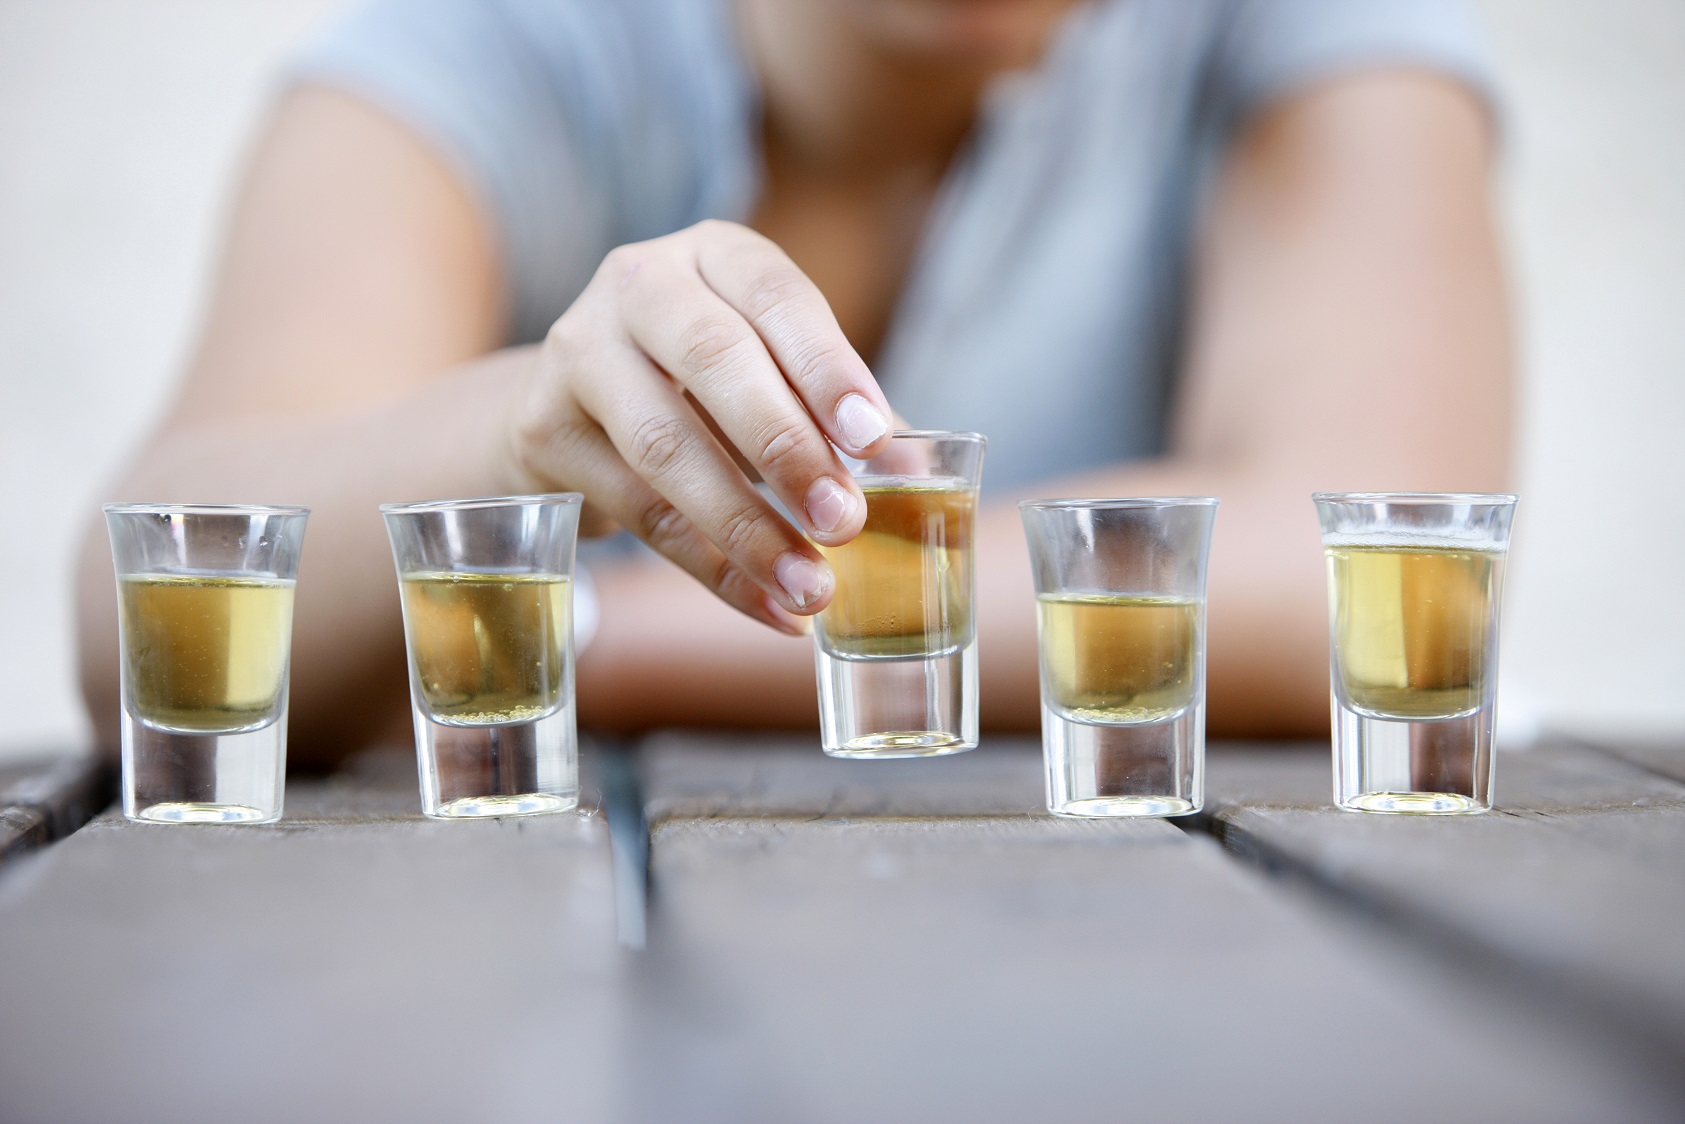 Adolescent drinking, Binge drinking. (Photo by: BSIP/UIG via Getty Images)